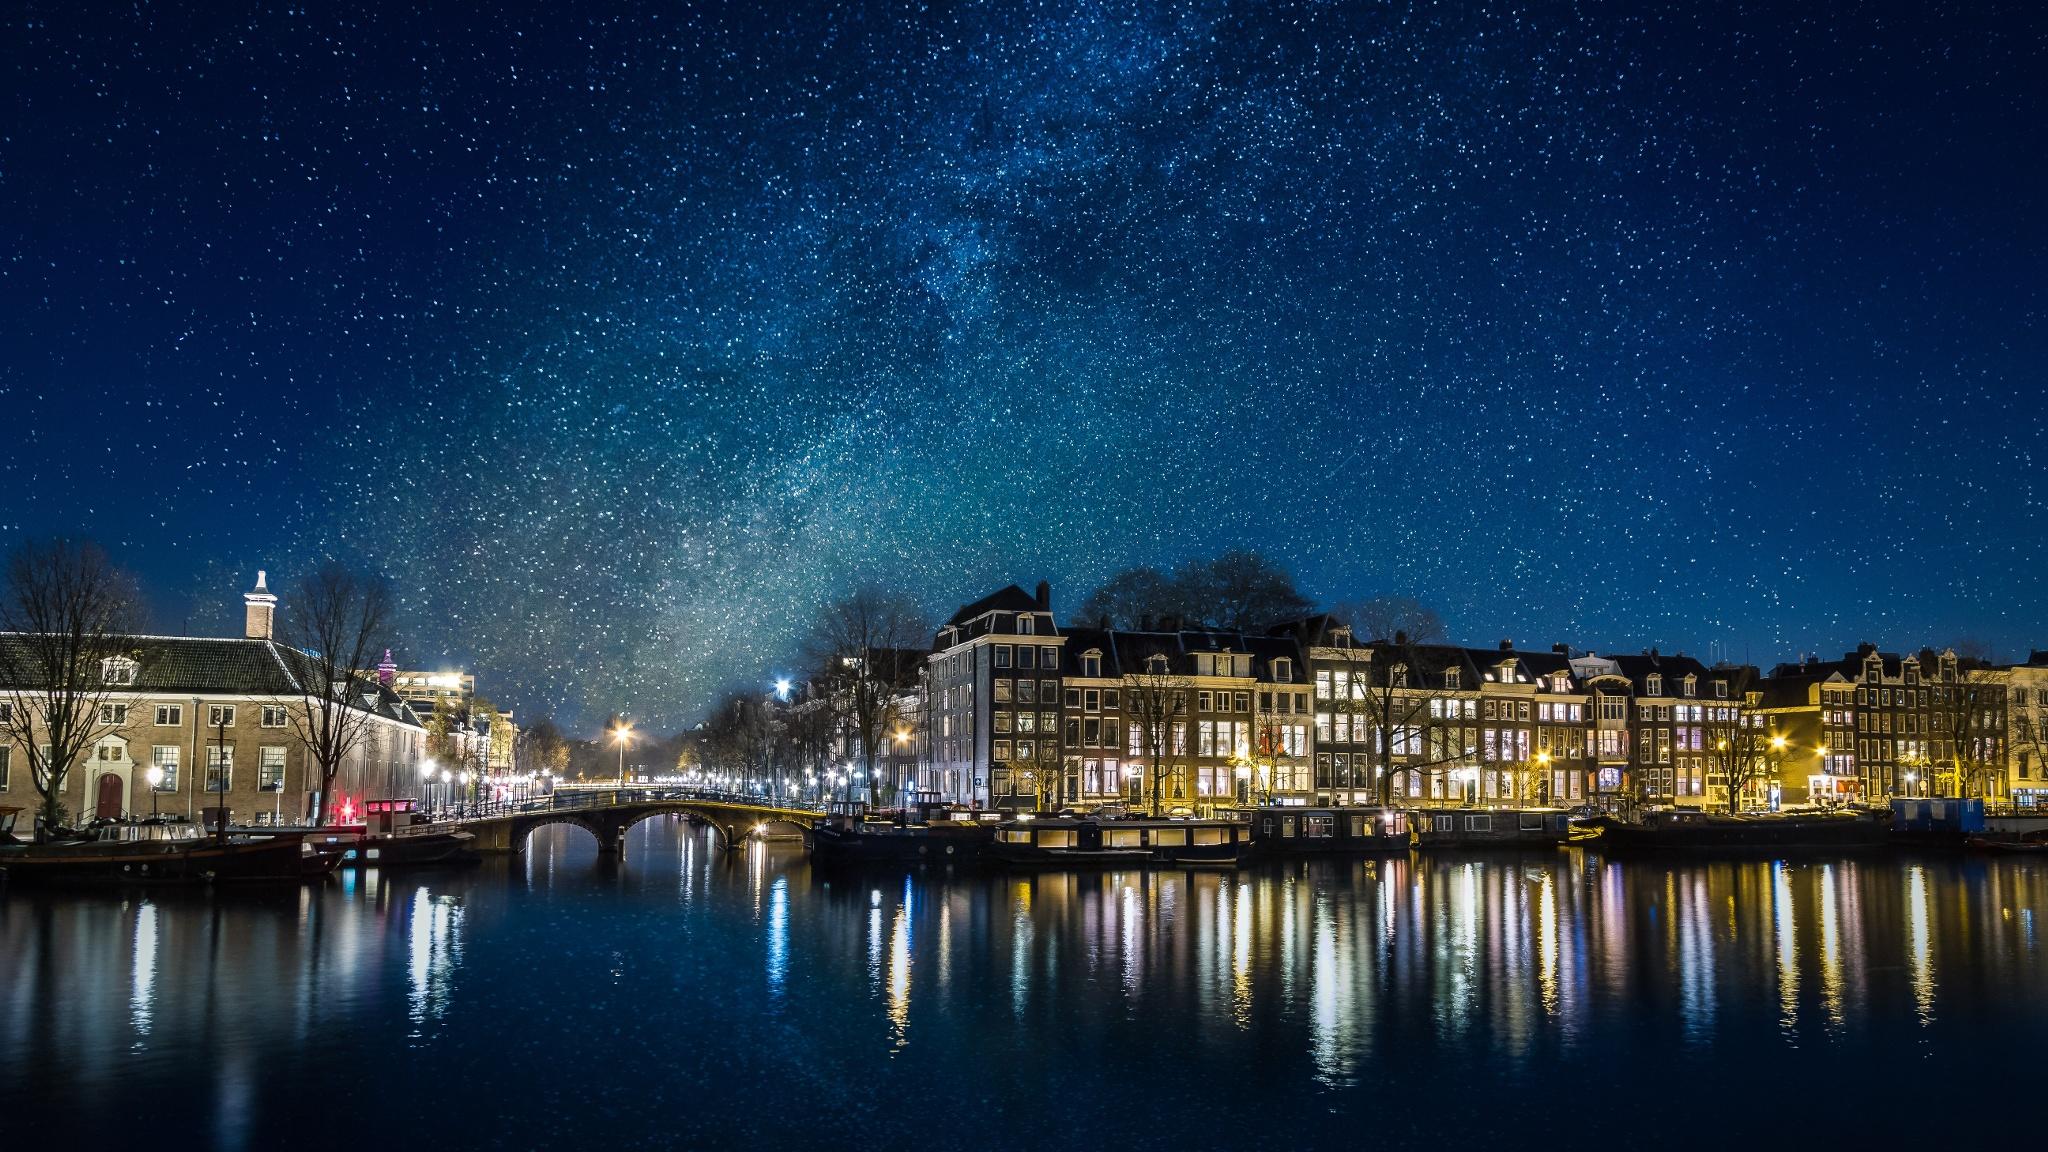 What Would it be like to see the Milky Way over Amsterdam?